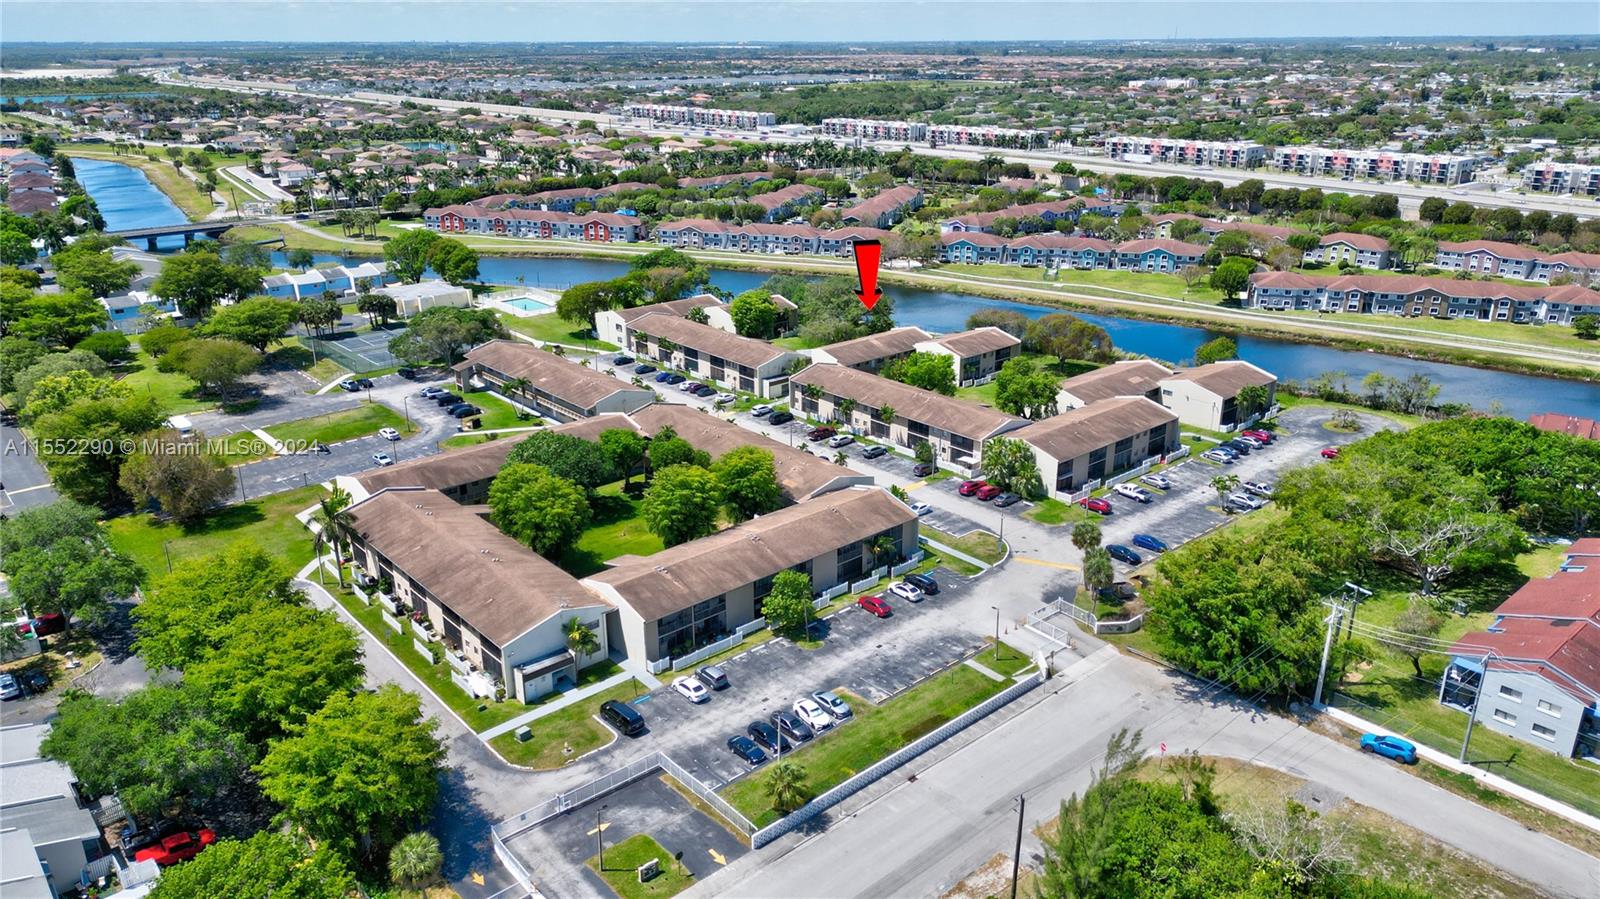 INVESTOR OPPORTUNITY TO OWN A UNIT IN MIAMI AREA, ONE BEDROOM ONE BATH UNIT, WASHER/DRYER, THIS COMMUNITY OFFERS A POOL, CLUBHOUSE, TENNIS COURT, BBQ PICNIC AREA, AND PLAYGROUND. READY TO RENT. Location: Minutes from the turnpike, US1, Old Cutler Road, Palmetto Bay and 30 minutes from Key Largo.